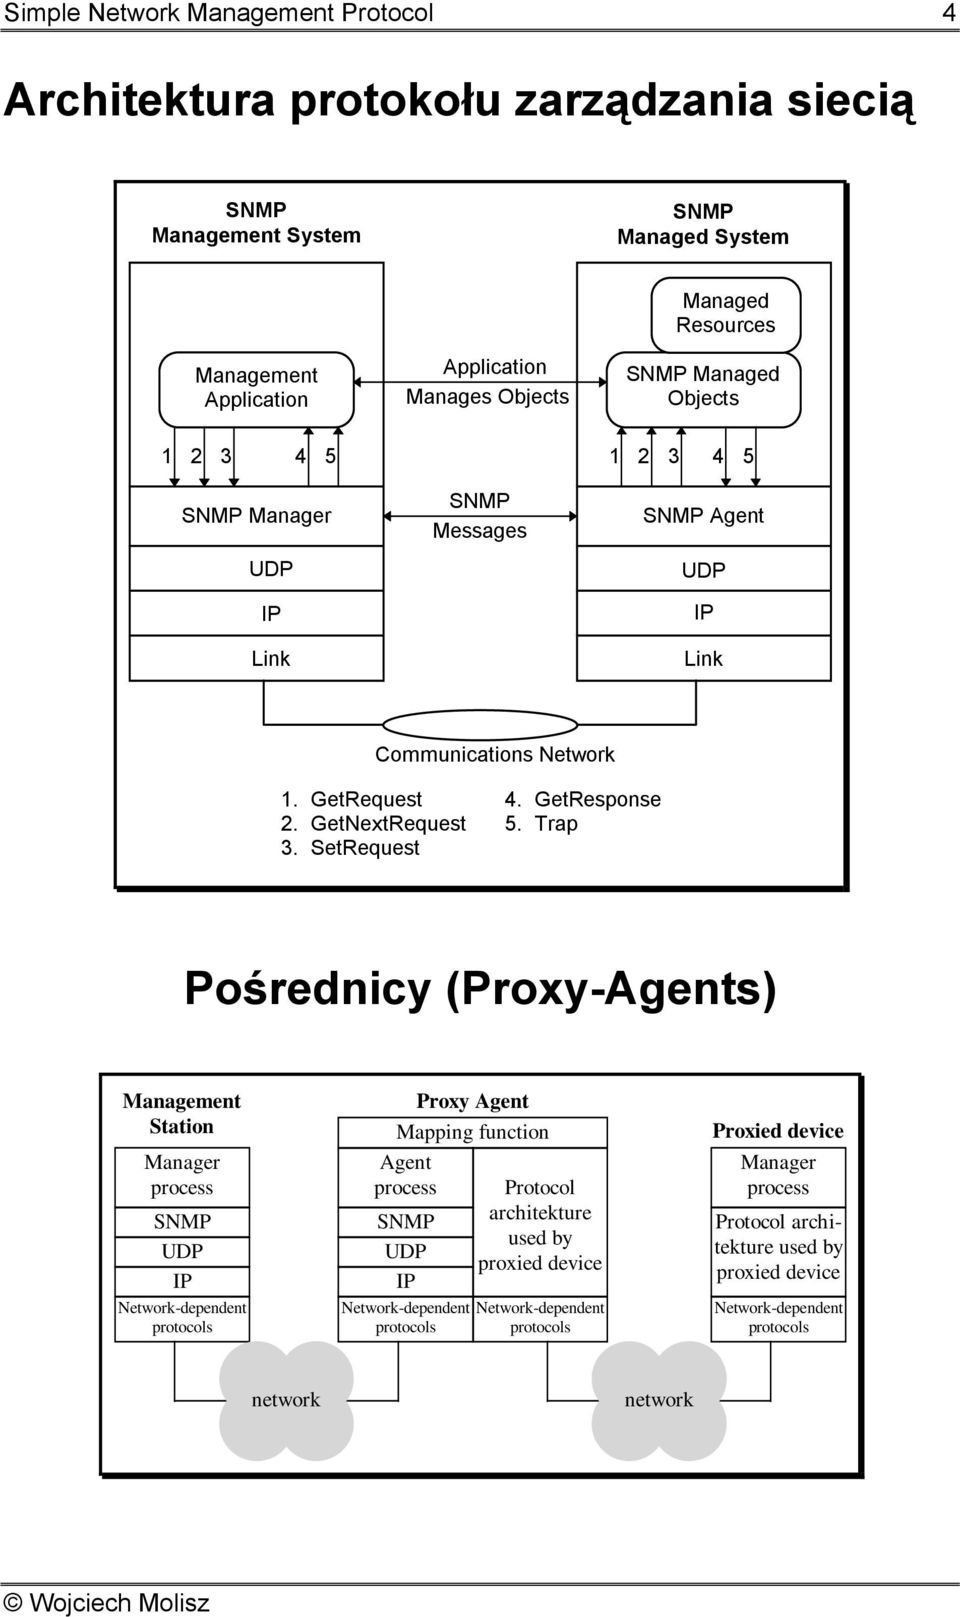 Trap Pośrednicy (Proxy-Agents) Management Station Manager process Network-dependent protocols Proxy Agent Mapping function Agent process Network-dependent protocols